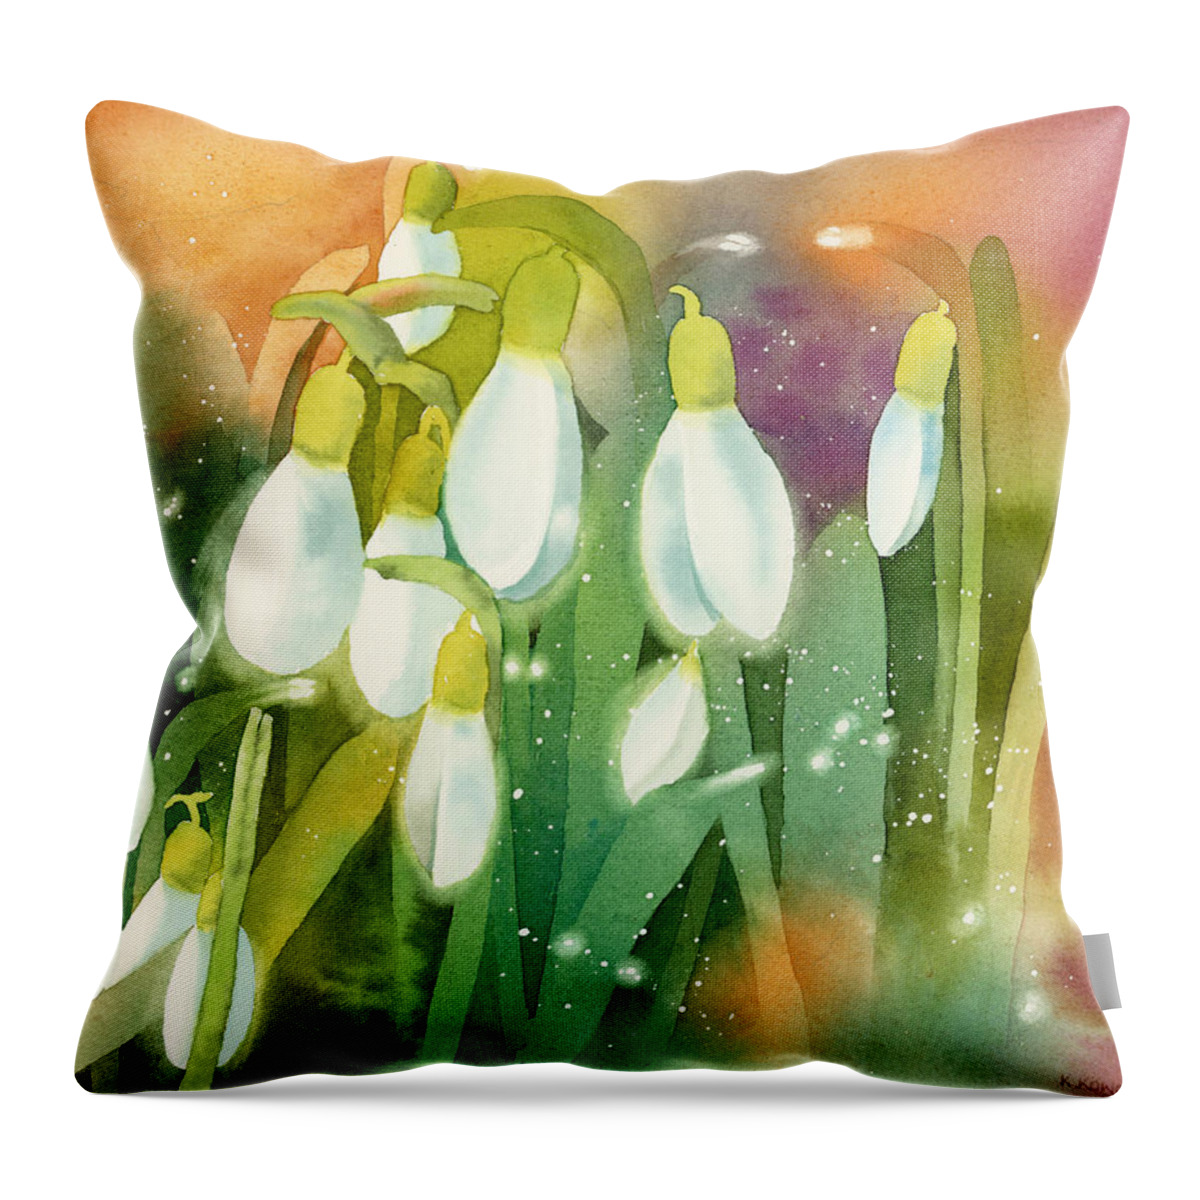 Snowdrops Throw Pillow featuring the painting Snowdrops - Magical Lanterns by Espero Art